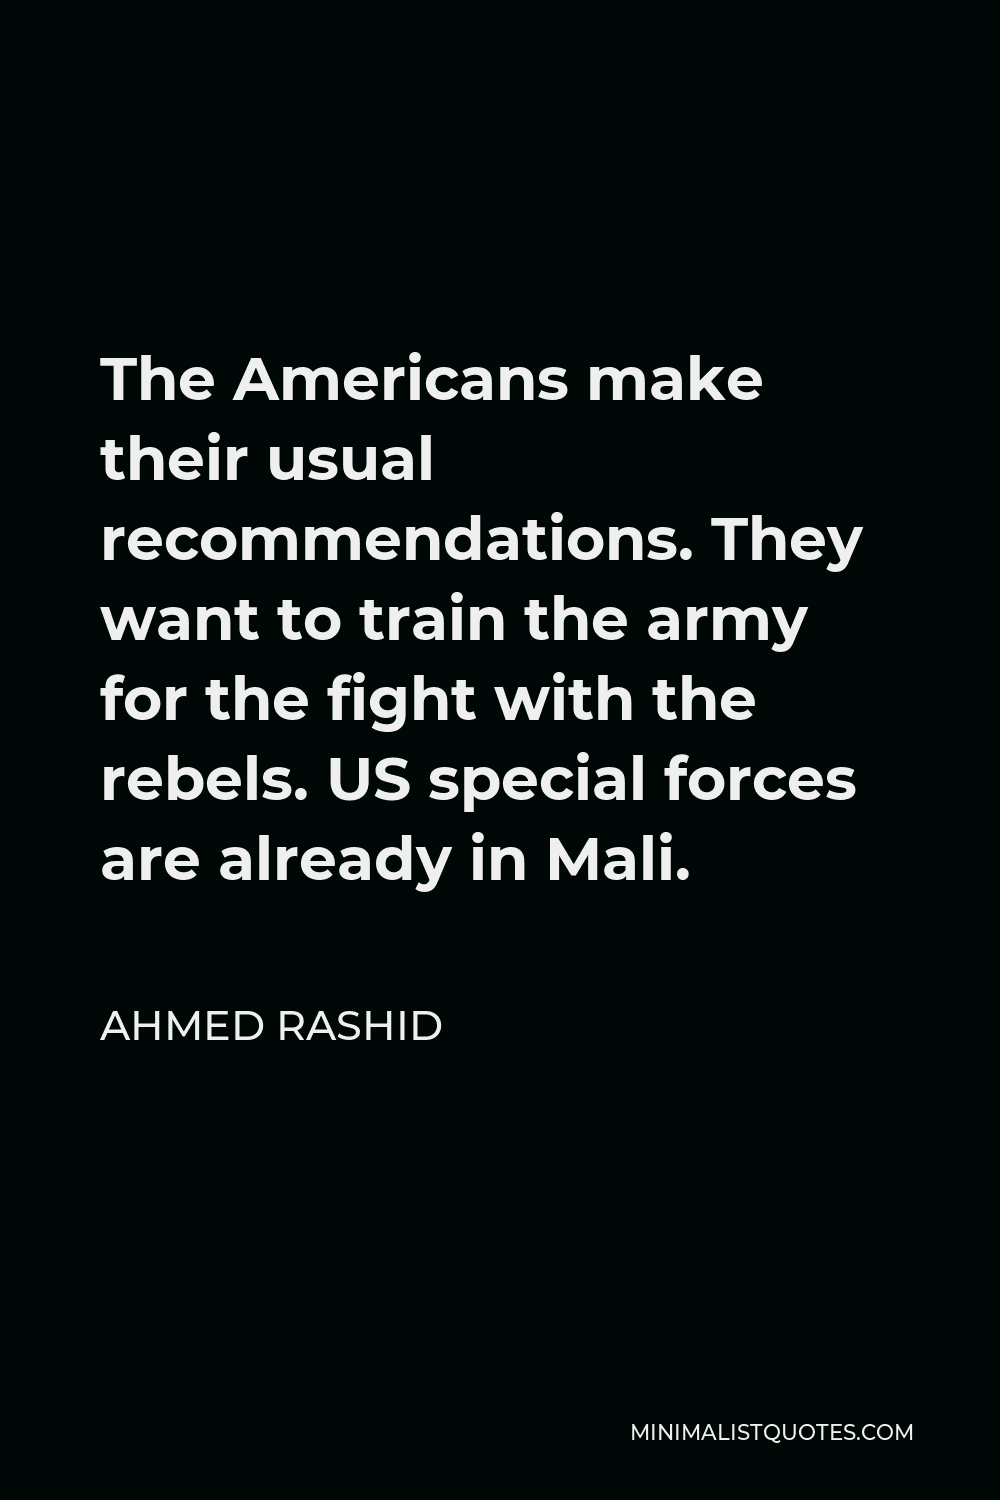 Ahmed Rashid Quote - The Americans make their usual recommendations. They want to train the army for the fight with the rebels. US special forces are already in Mali.